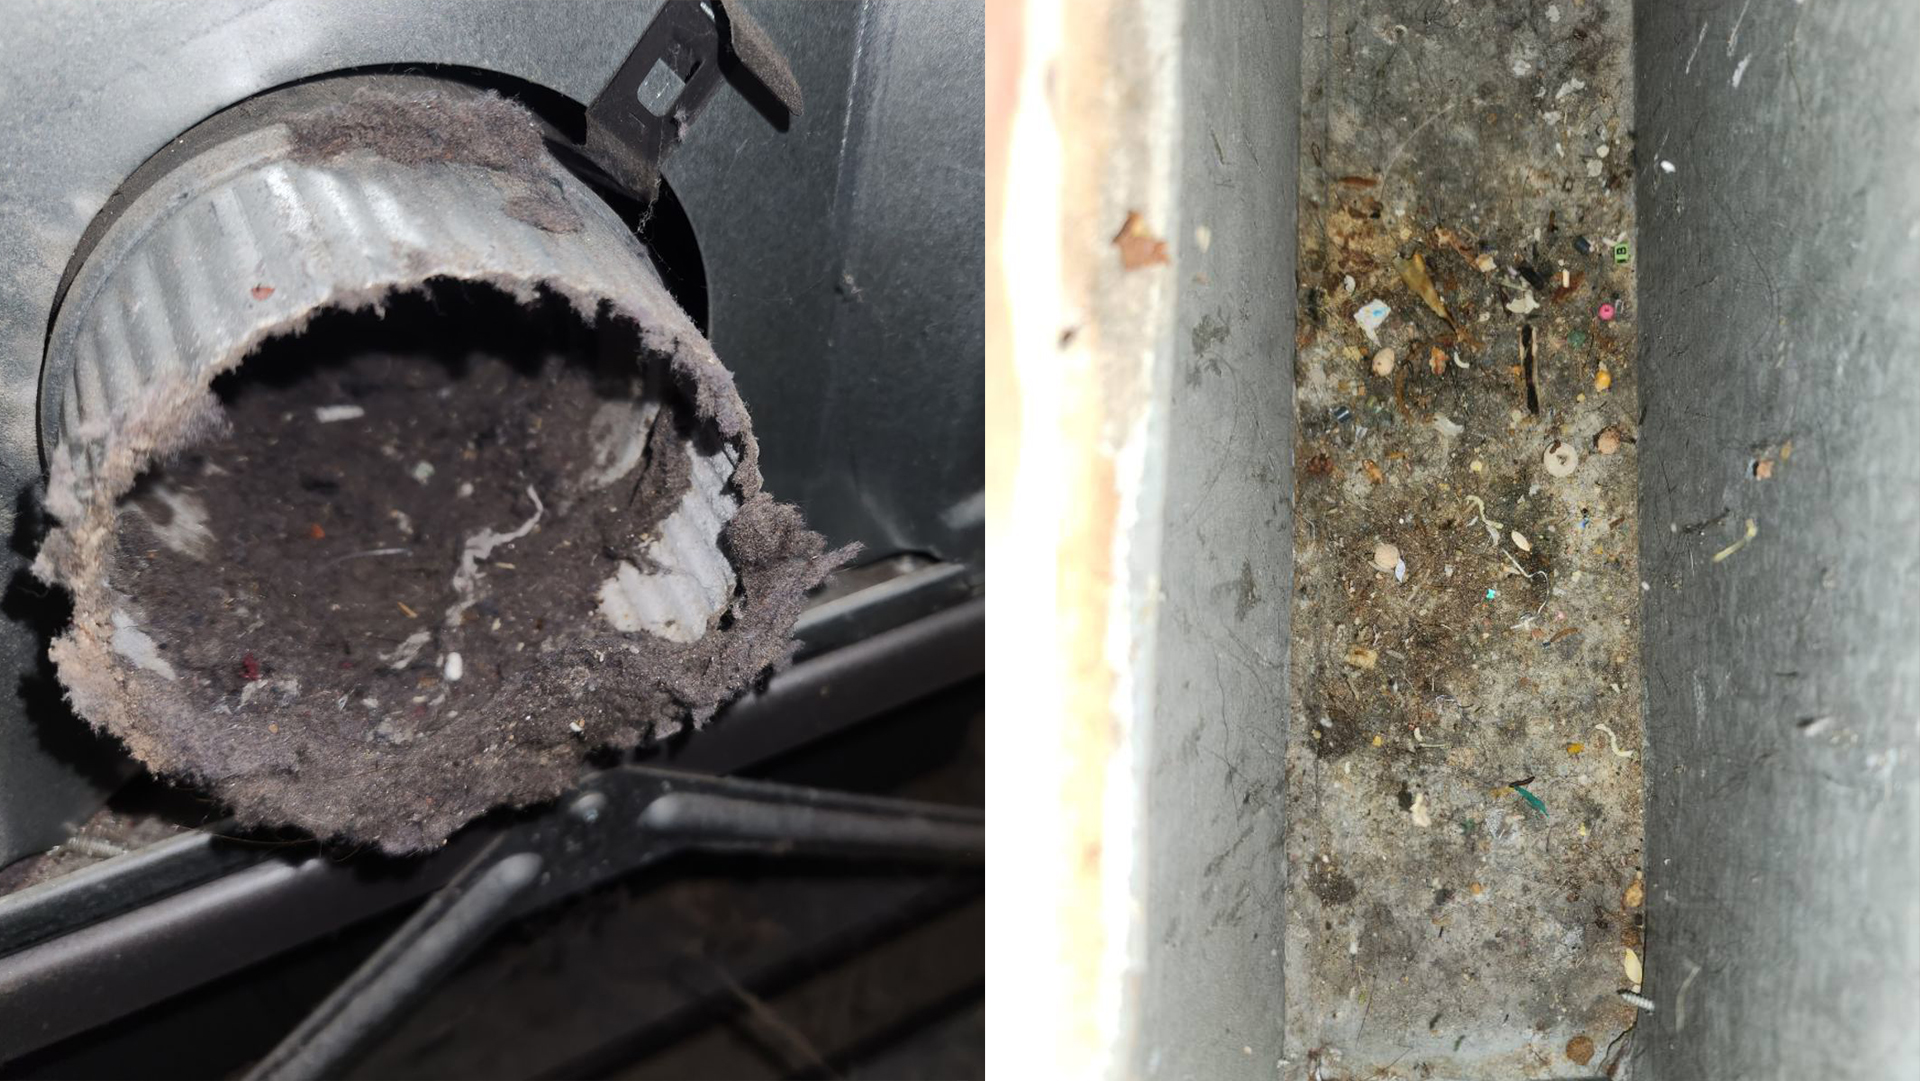 Dryer Vent Cleaning by air-serv duct cleaning